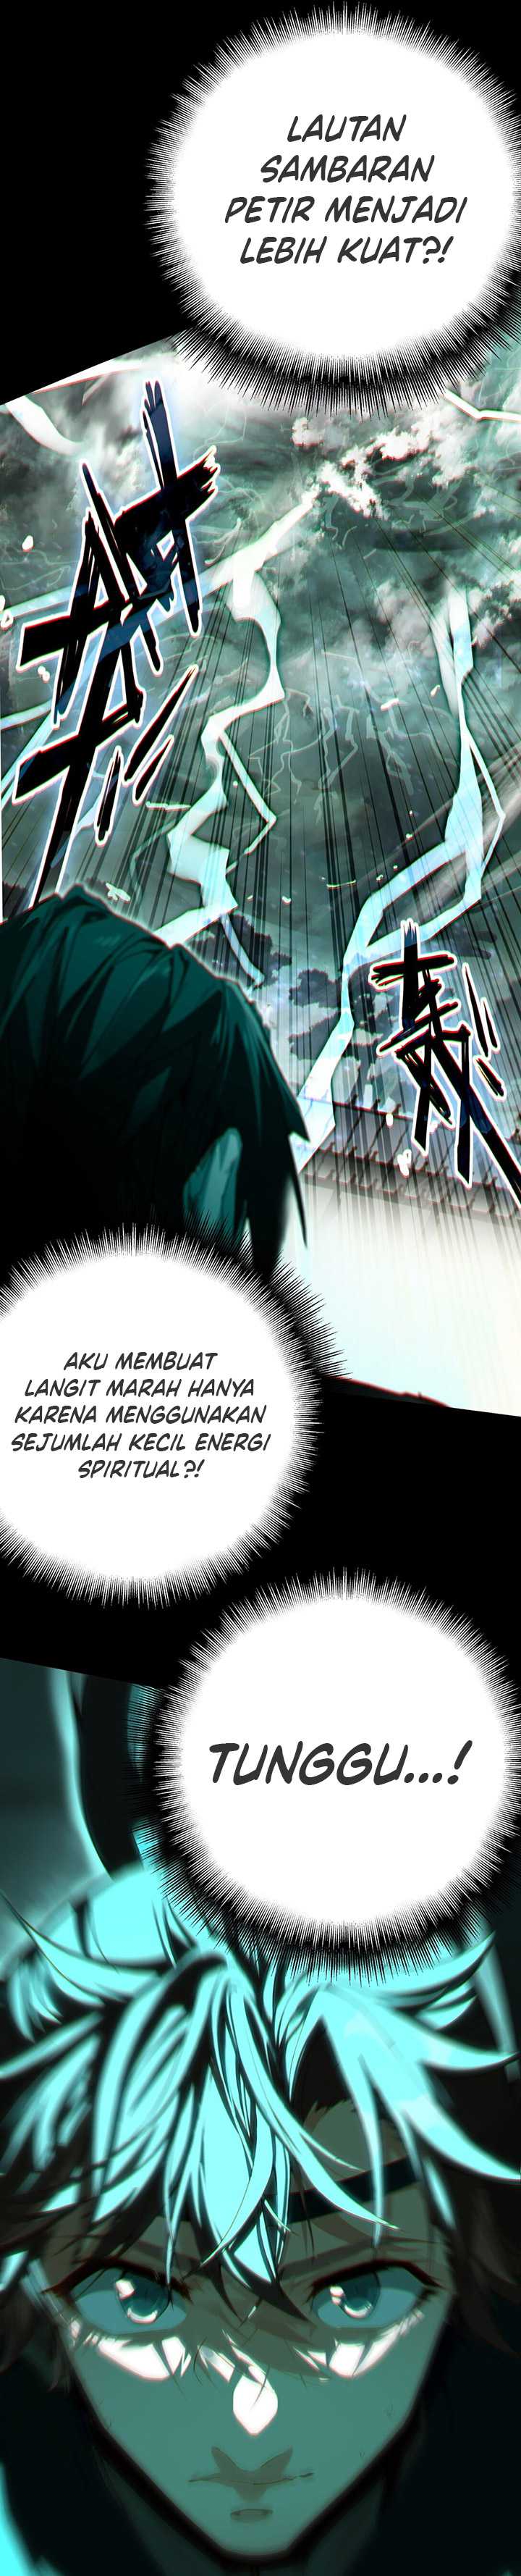 Curse Cultivation Chapter 02